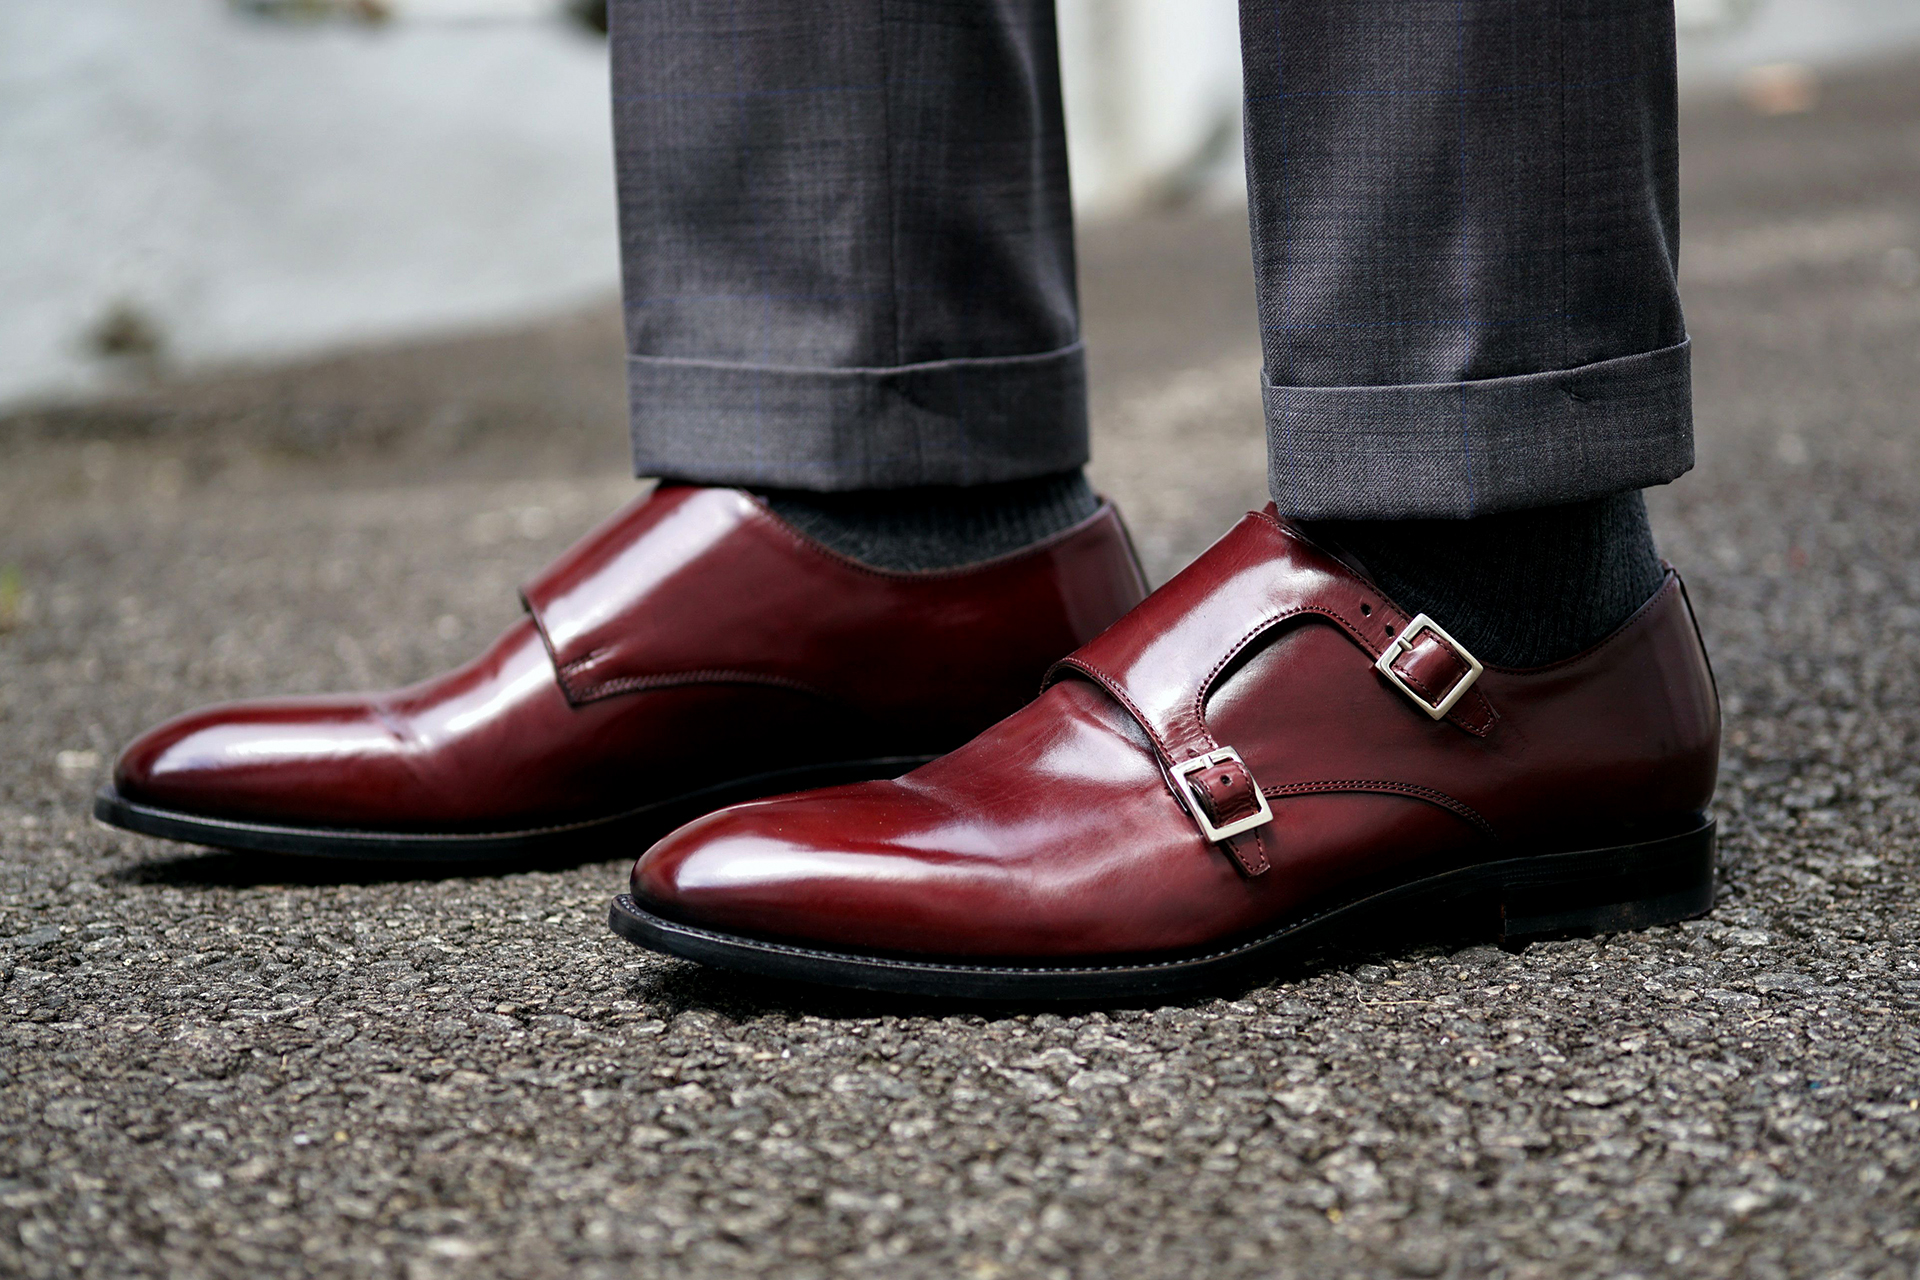 Burgundy Shoes and Grey Pants